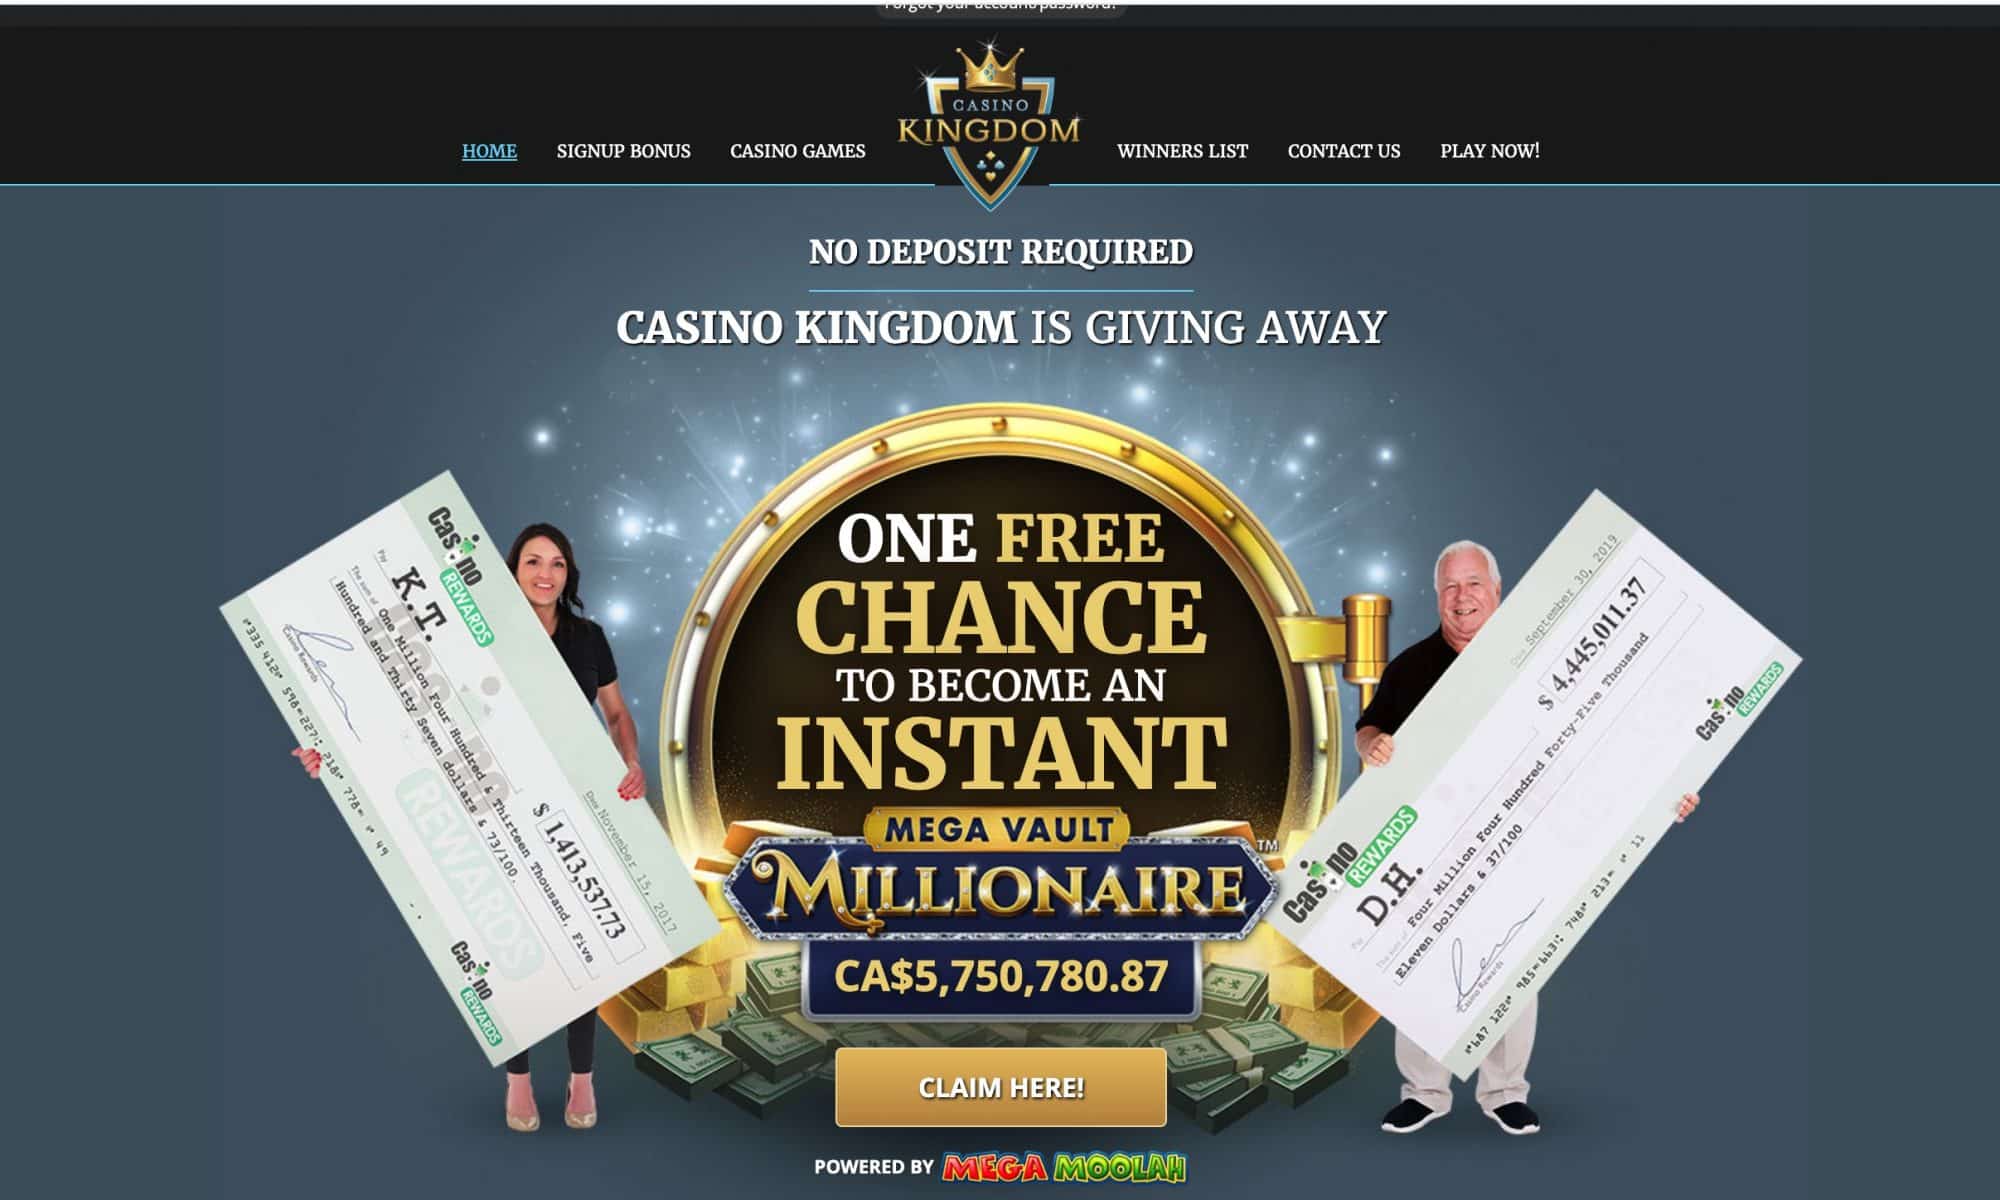 Casino Kingdom - A chance to be an instant millionaire!